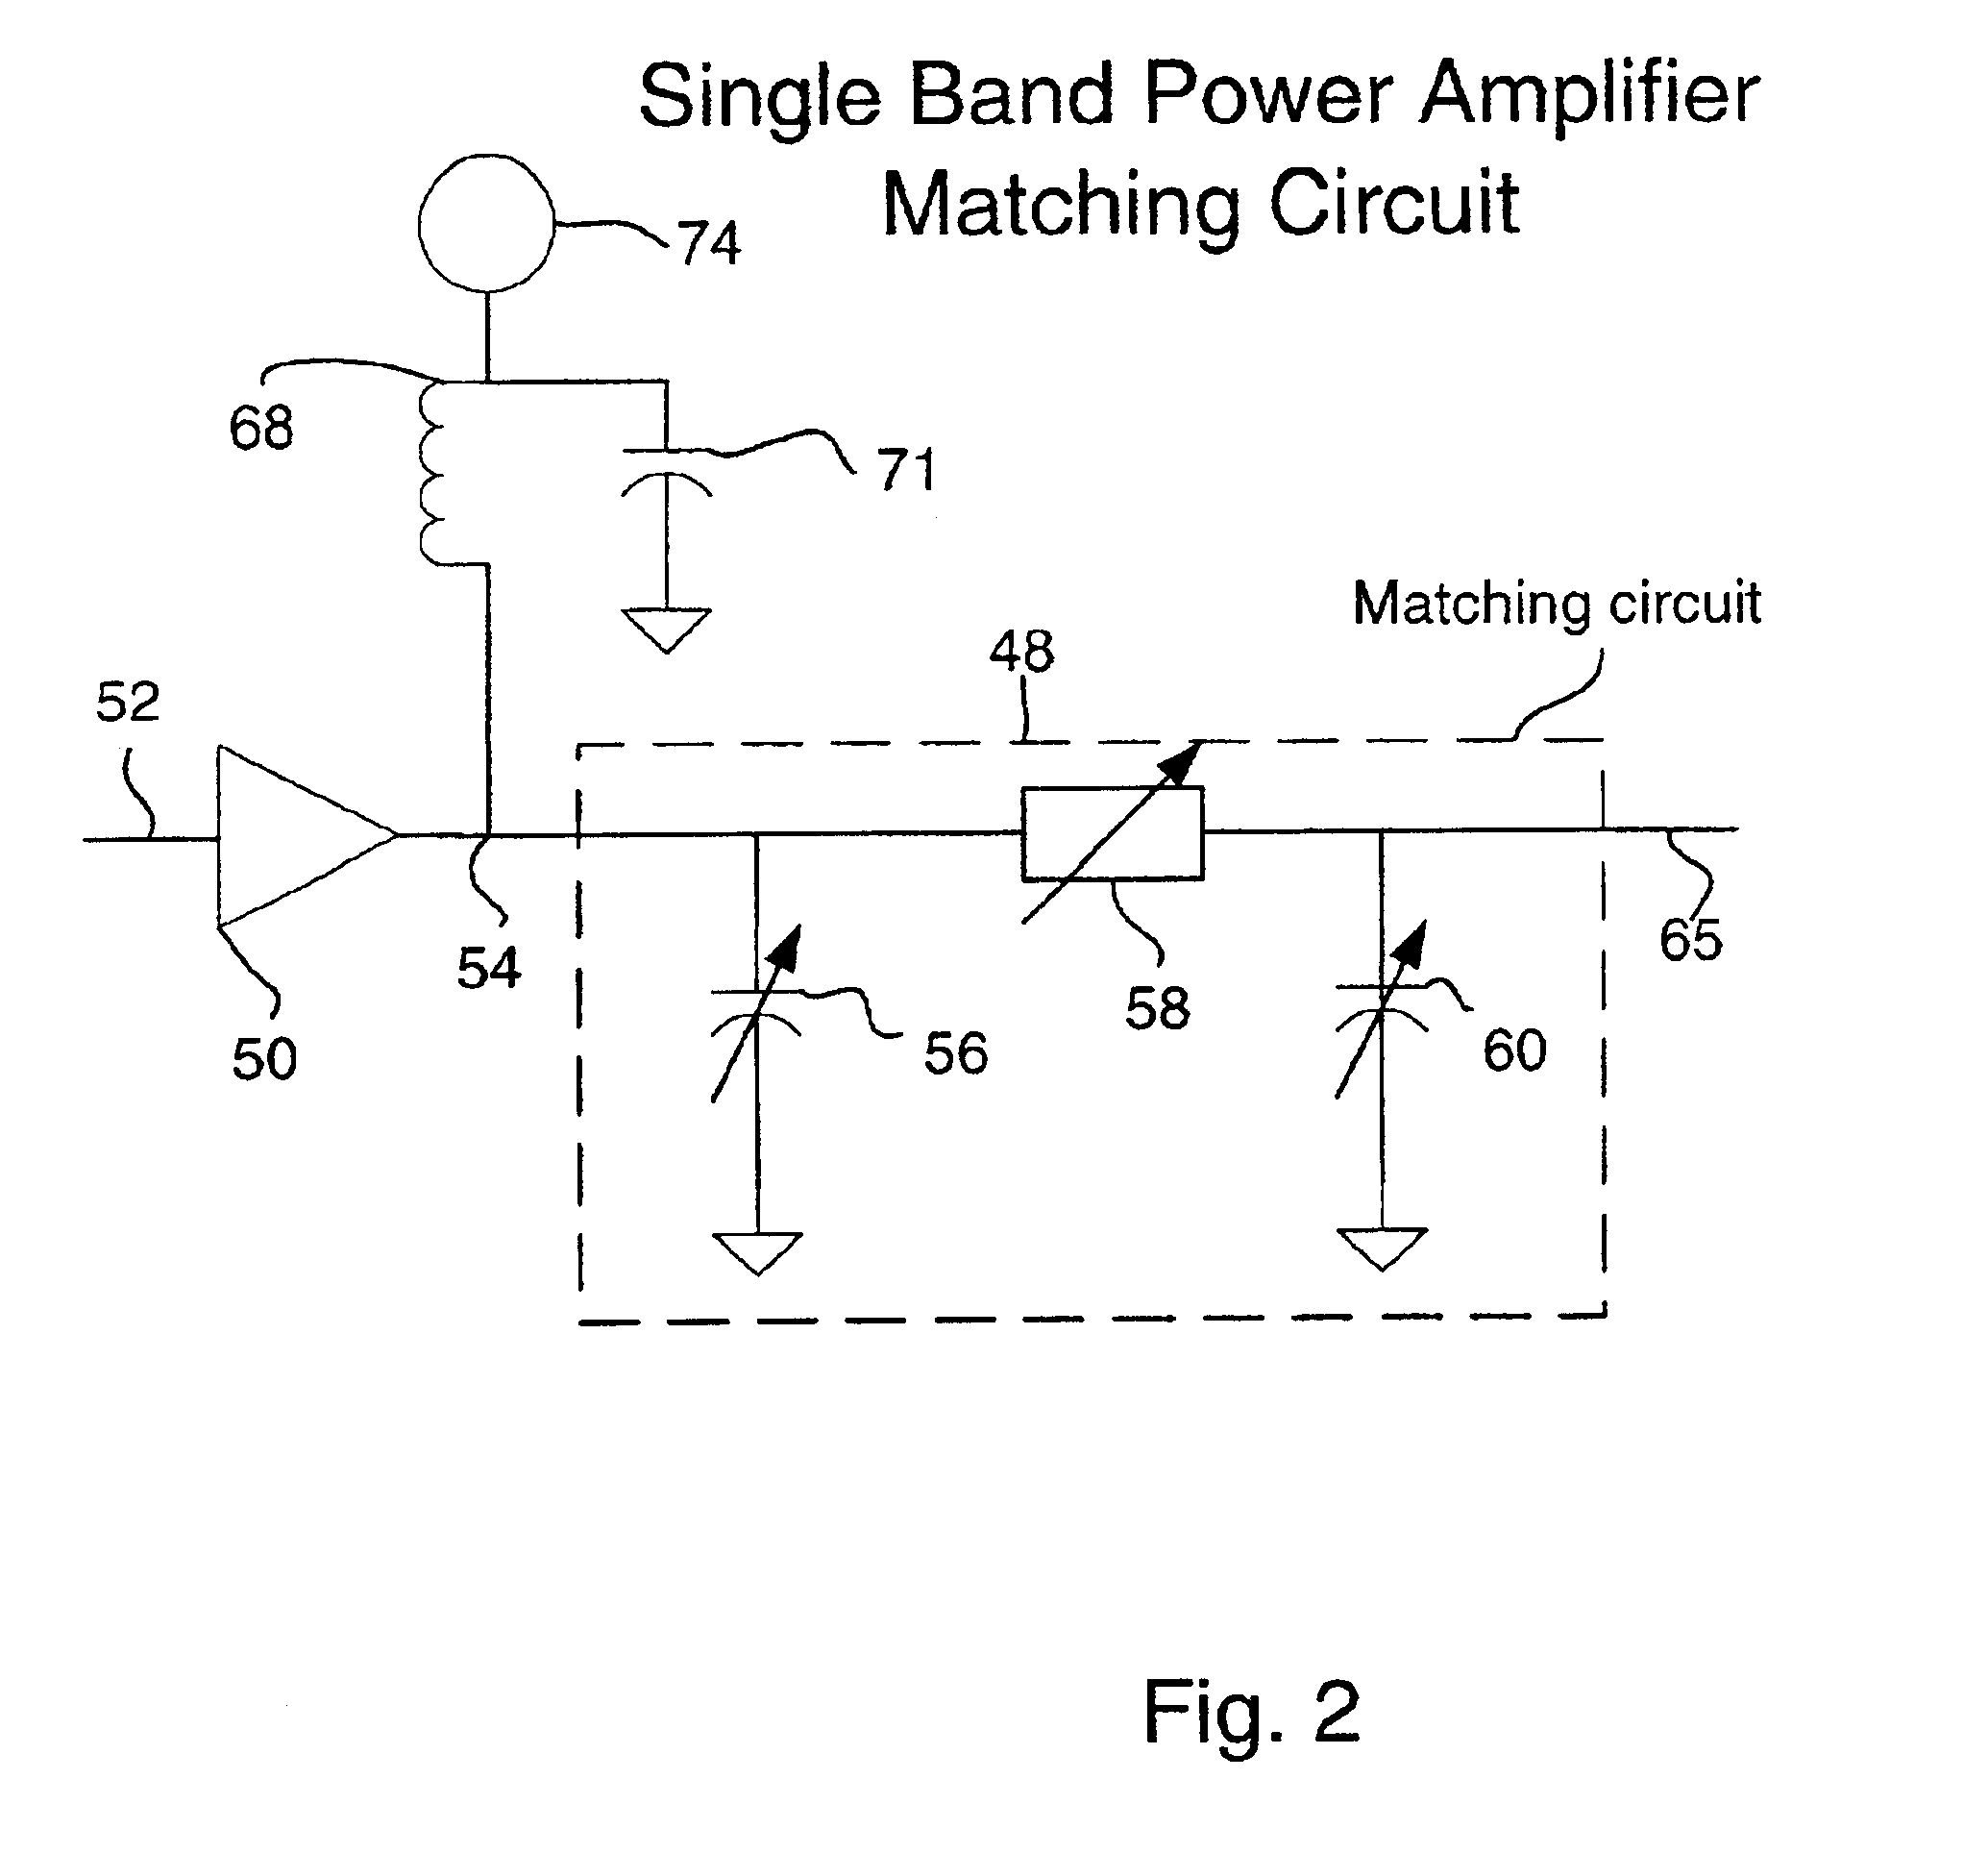 Tunable power amplifier matching circuit